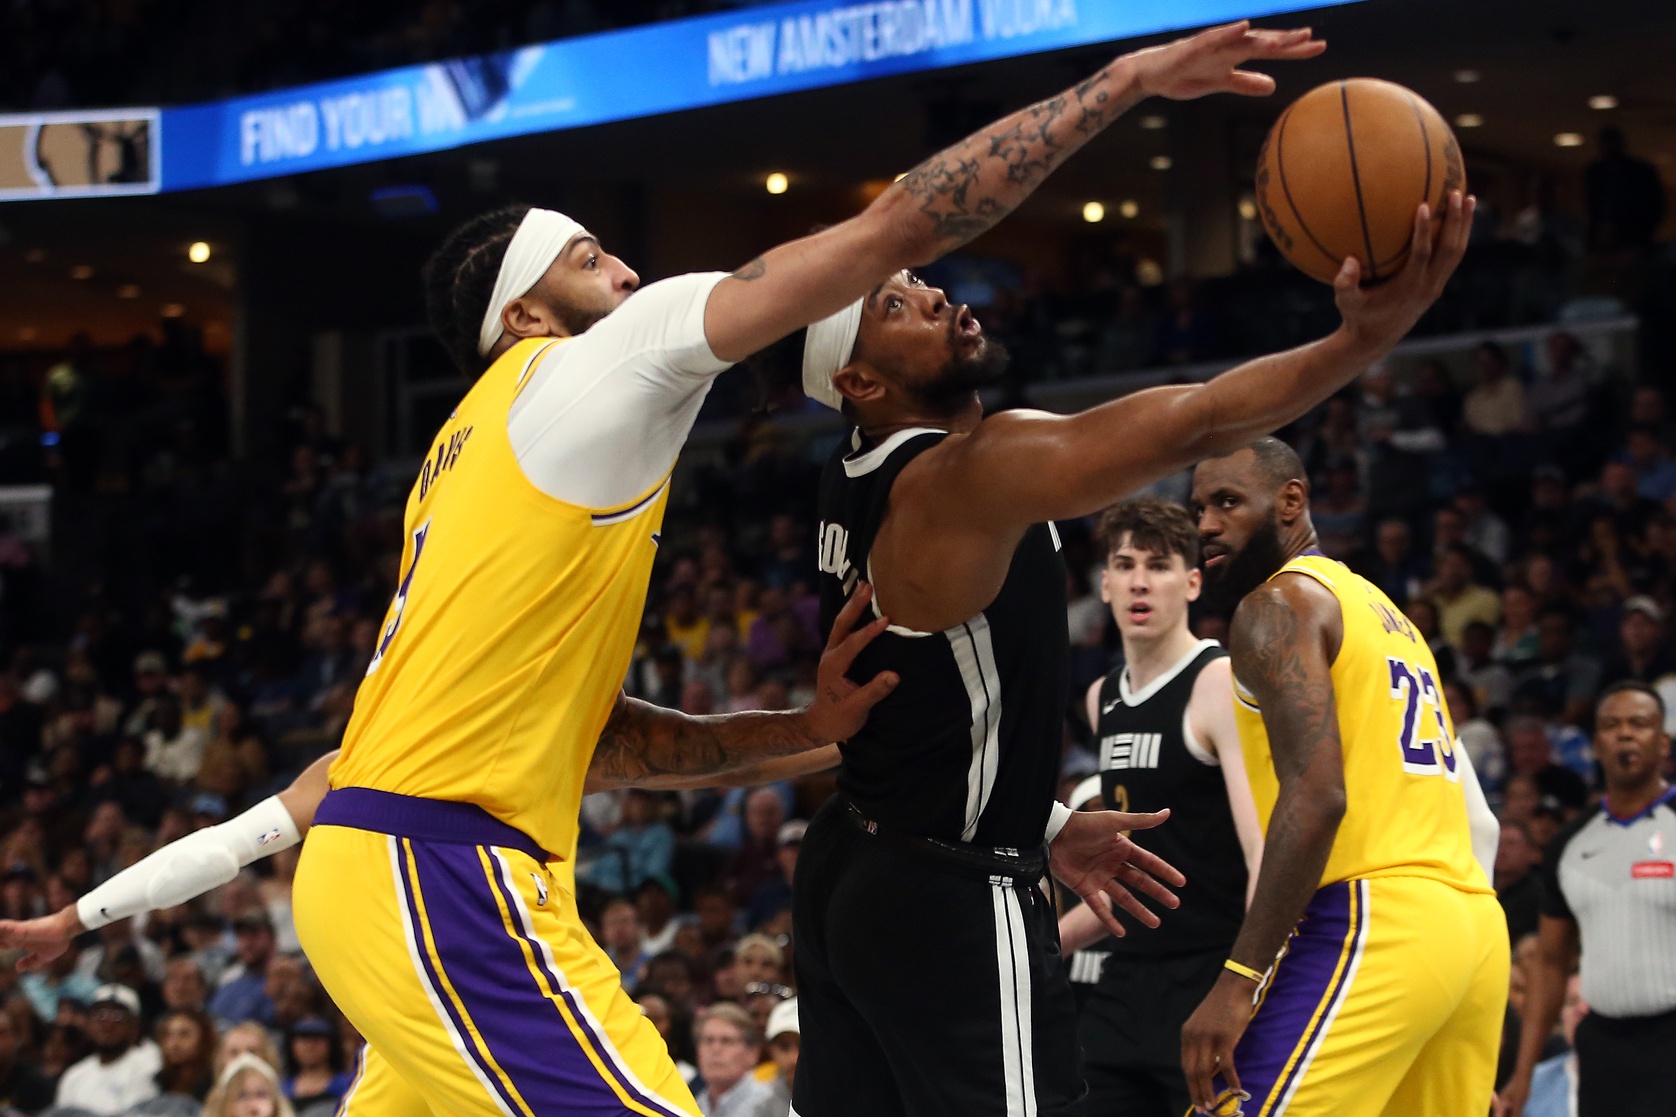 Los Angeles Lakers All-Star Anthony Davis makes defensive play